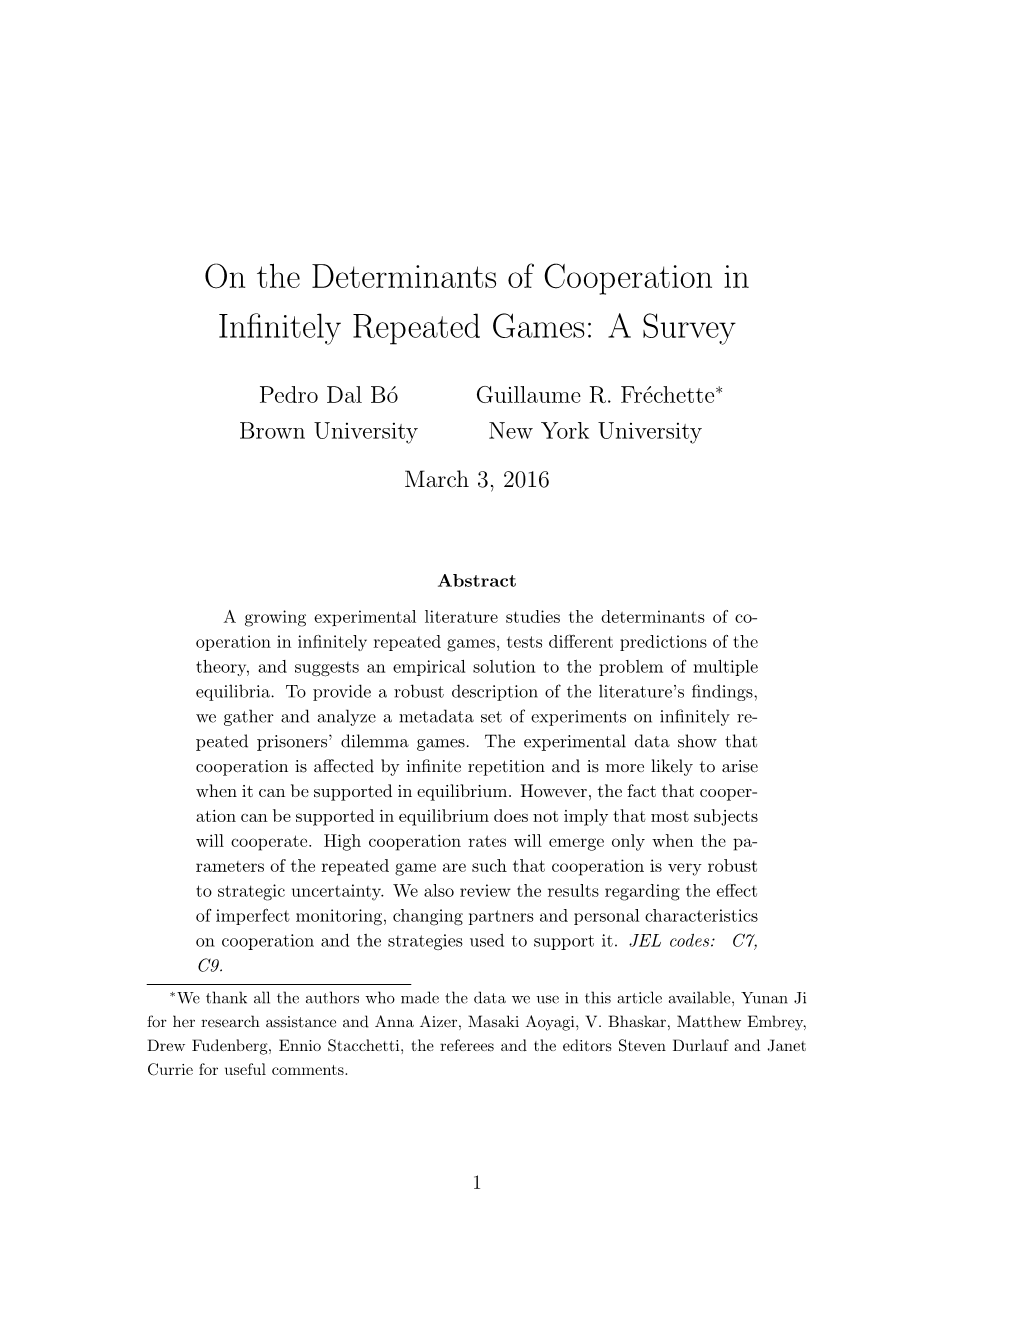 On the Determinants of Cooperation in Infinitely Repeated Games: a Survey